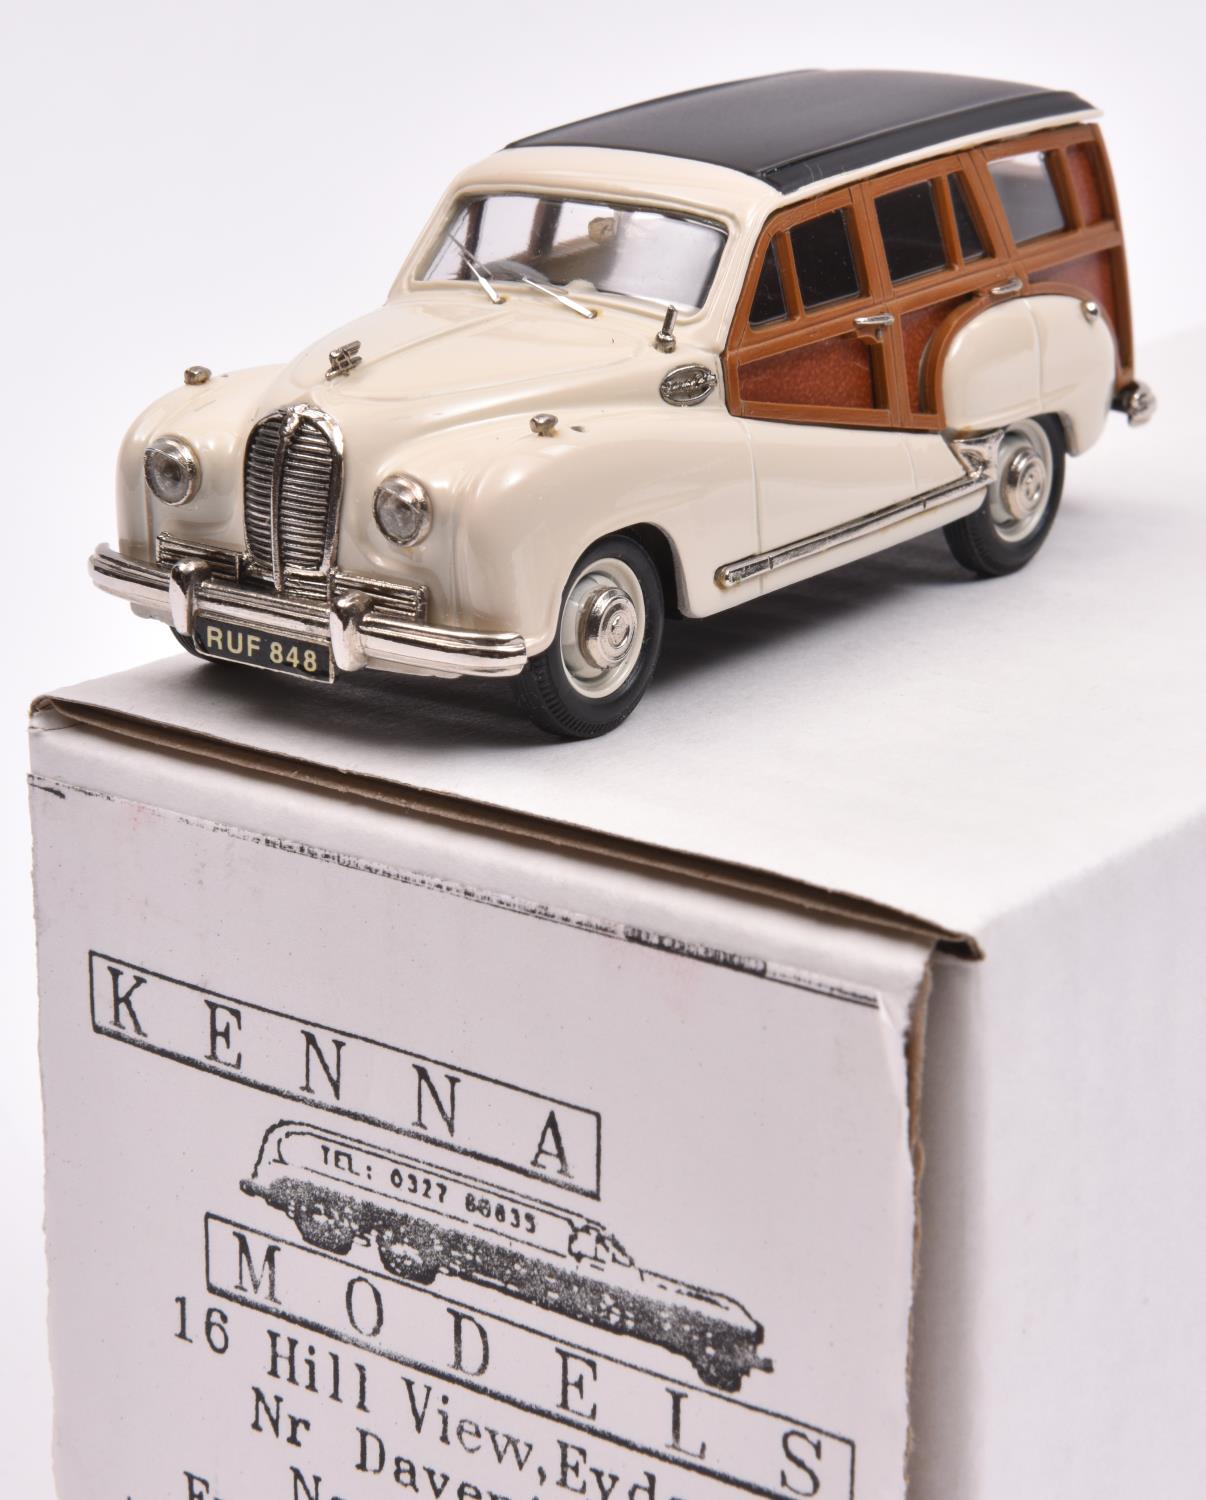 Kenna white metal Austin A70 Estate. An example in white with black roof and wood effect sides.